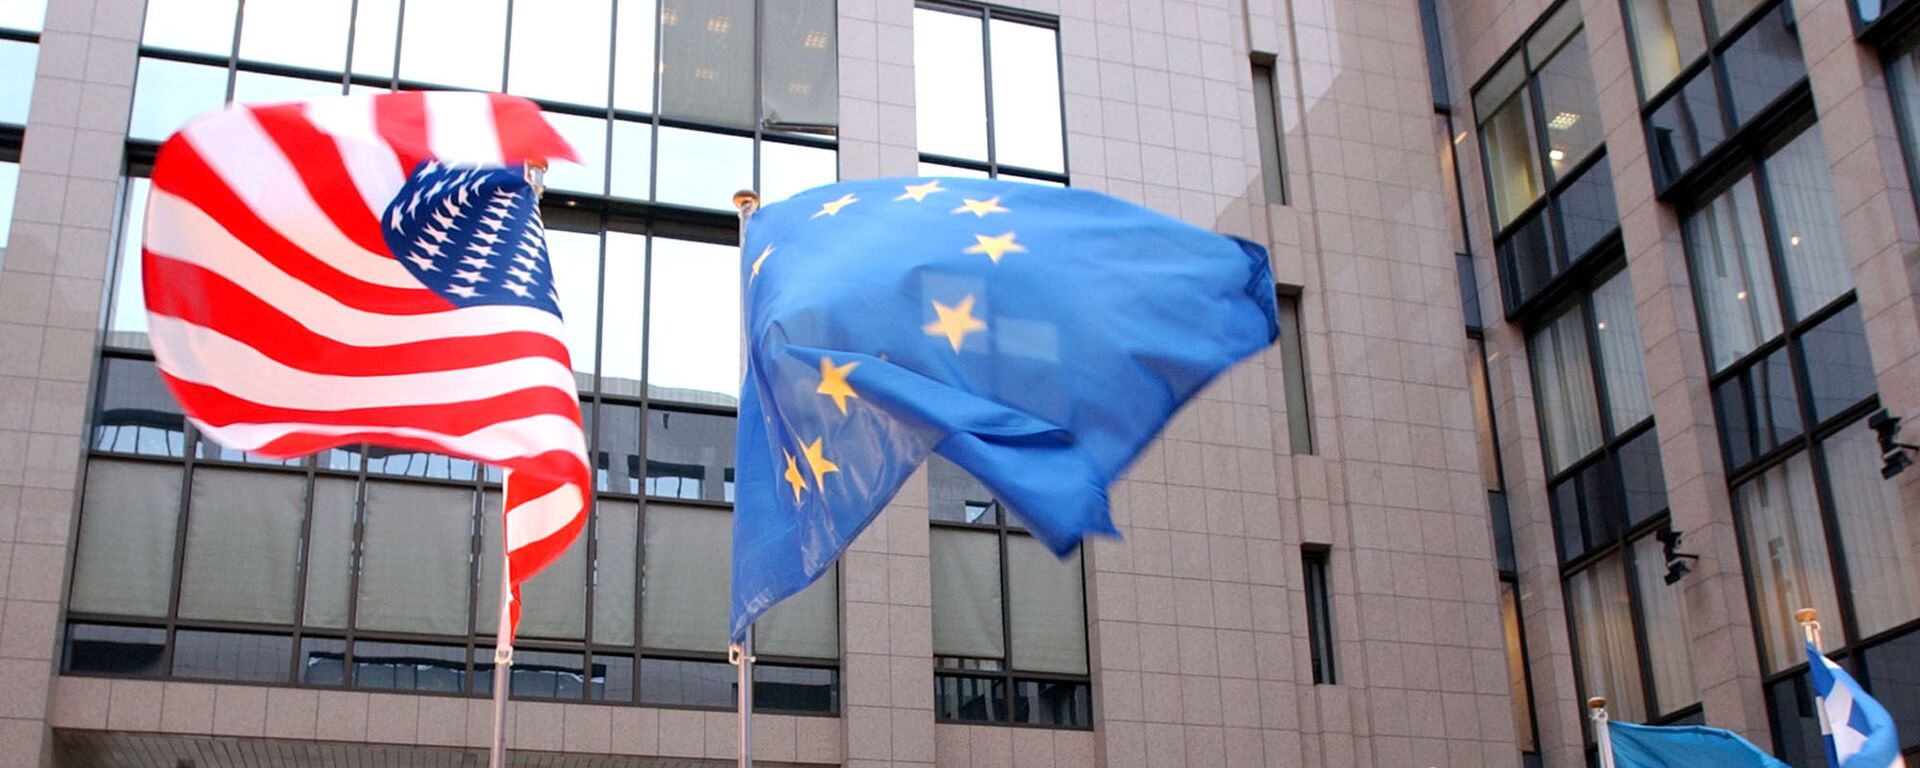 The US and EU flags, top left and right, fly in separate directions at the European Council building in Brussels - Sputnik Moldova-România, 1920, 27.04.2021